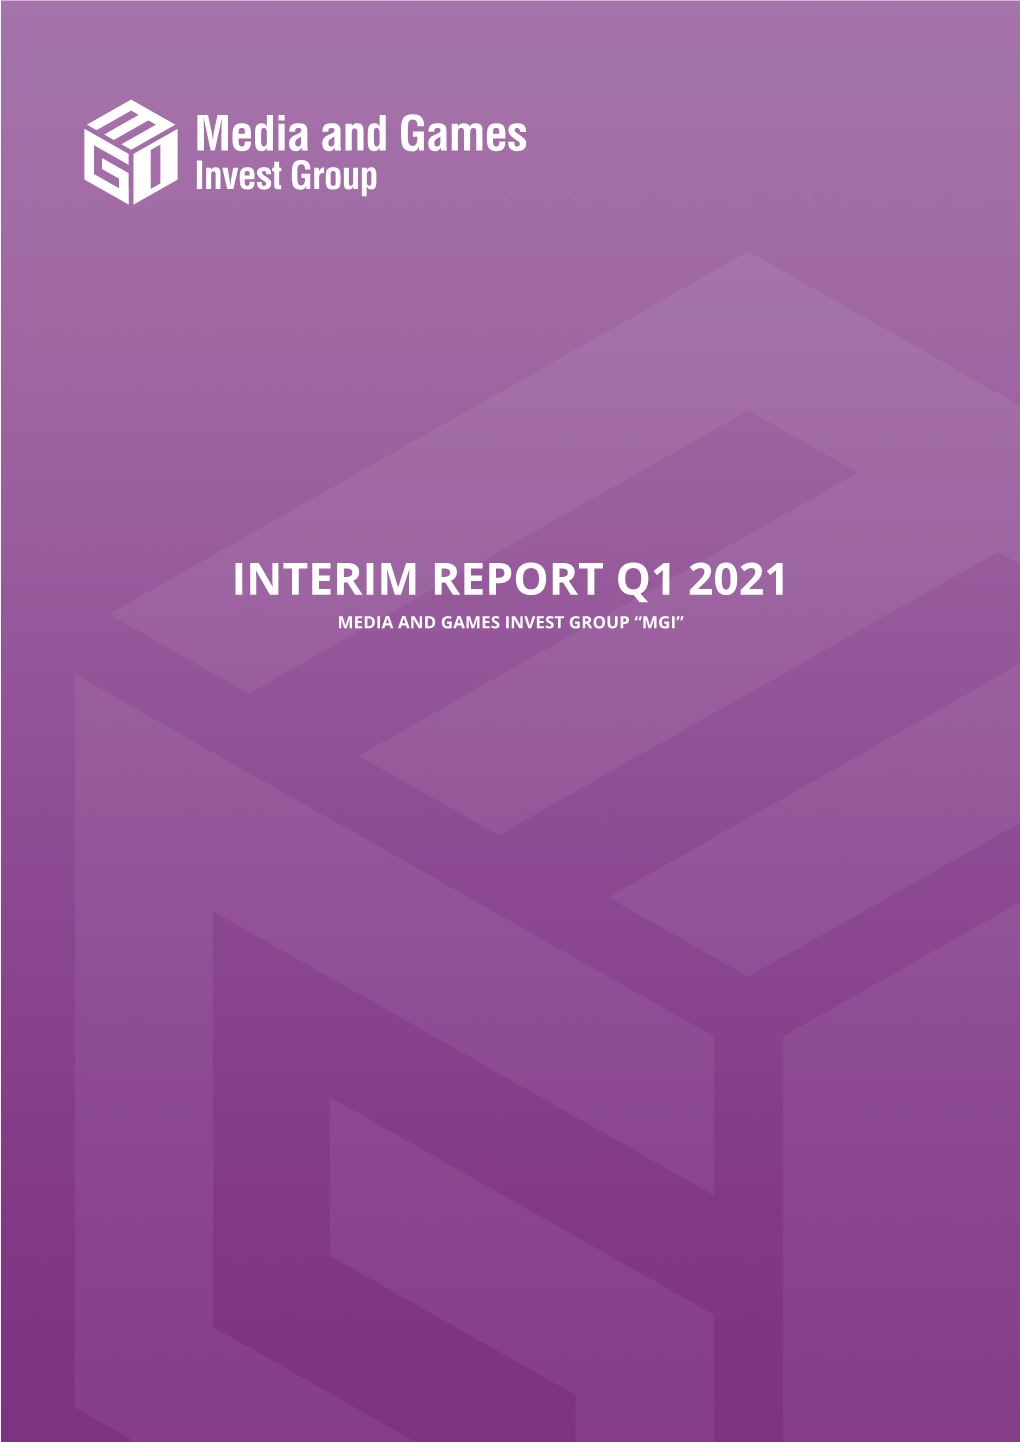 Interim Report Q1 2021 Media and Games Invest Group “Mgi”